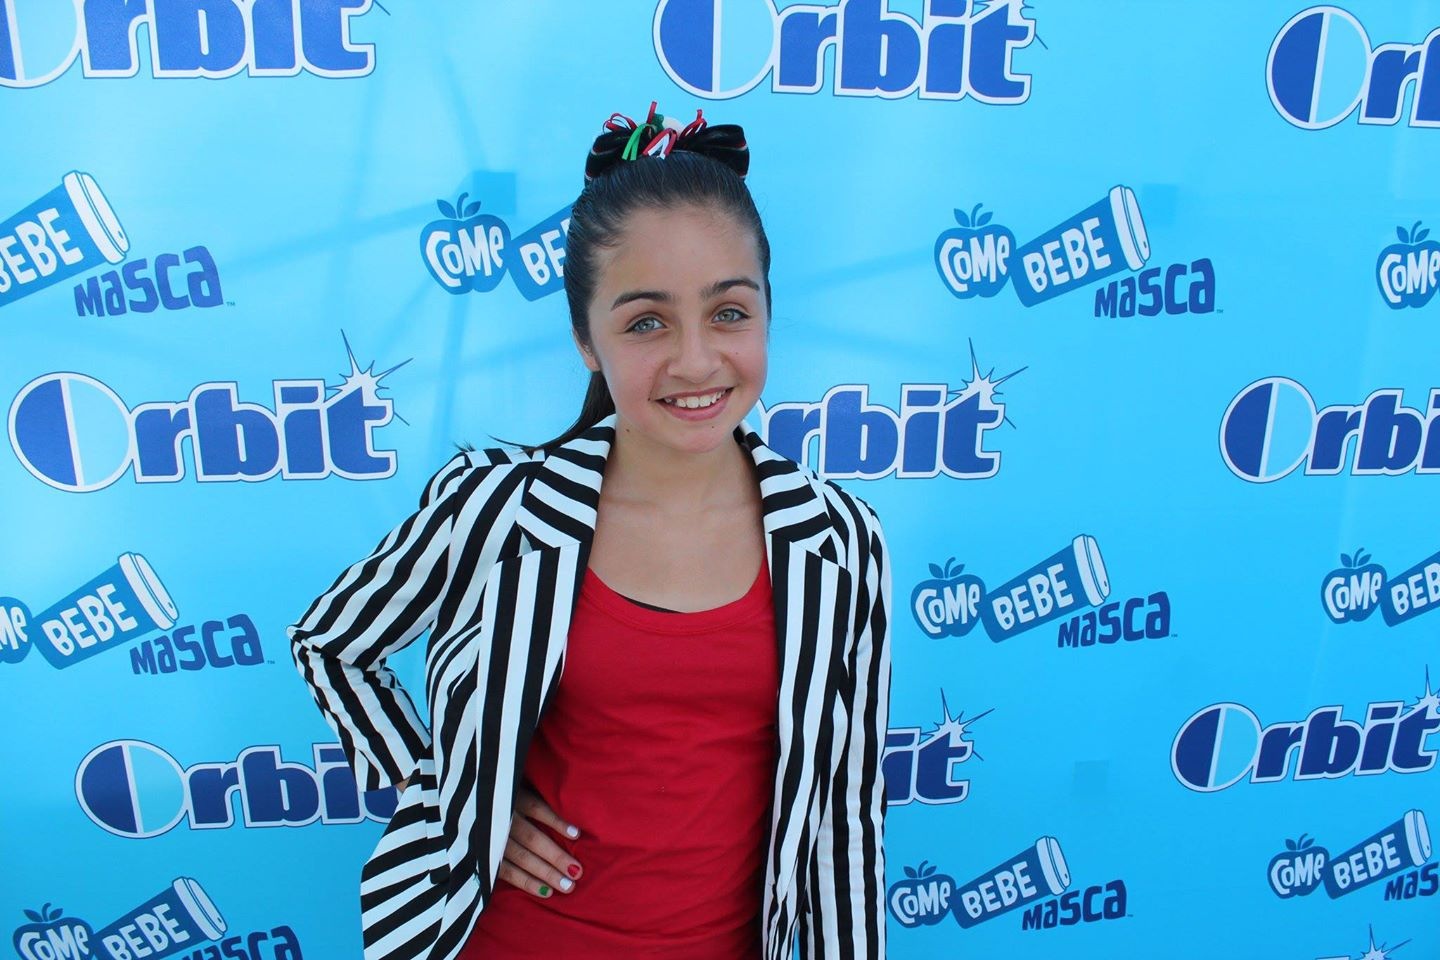 Samantha Elizondo on Orbit's Red Carpet when she performed at Mexico Plaza for Independance Day celebration.